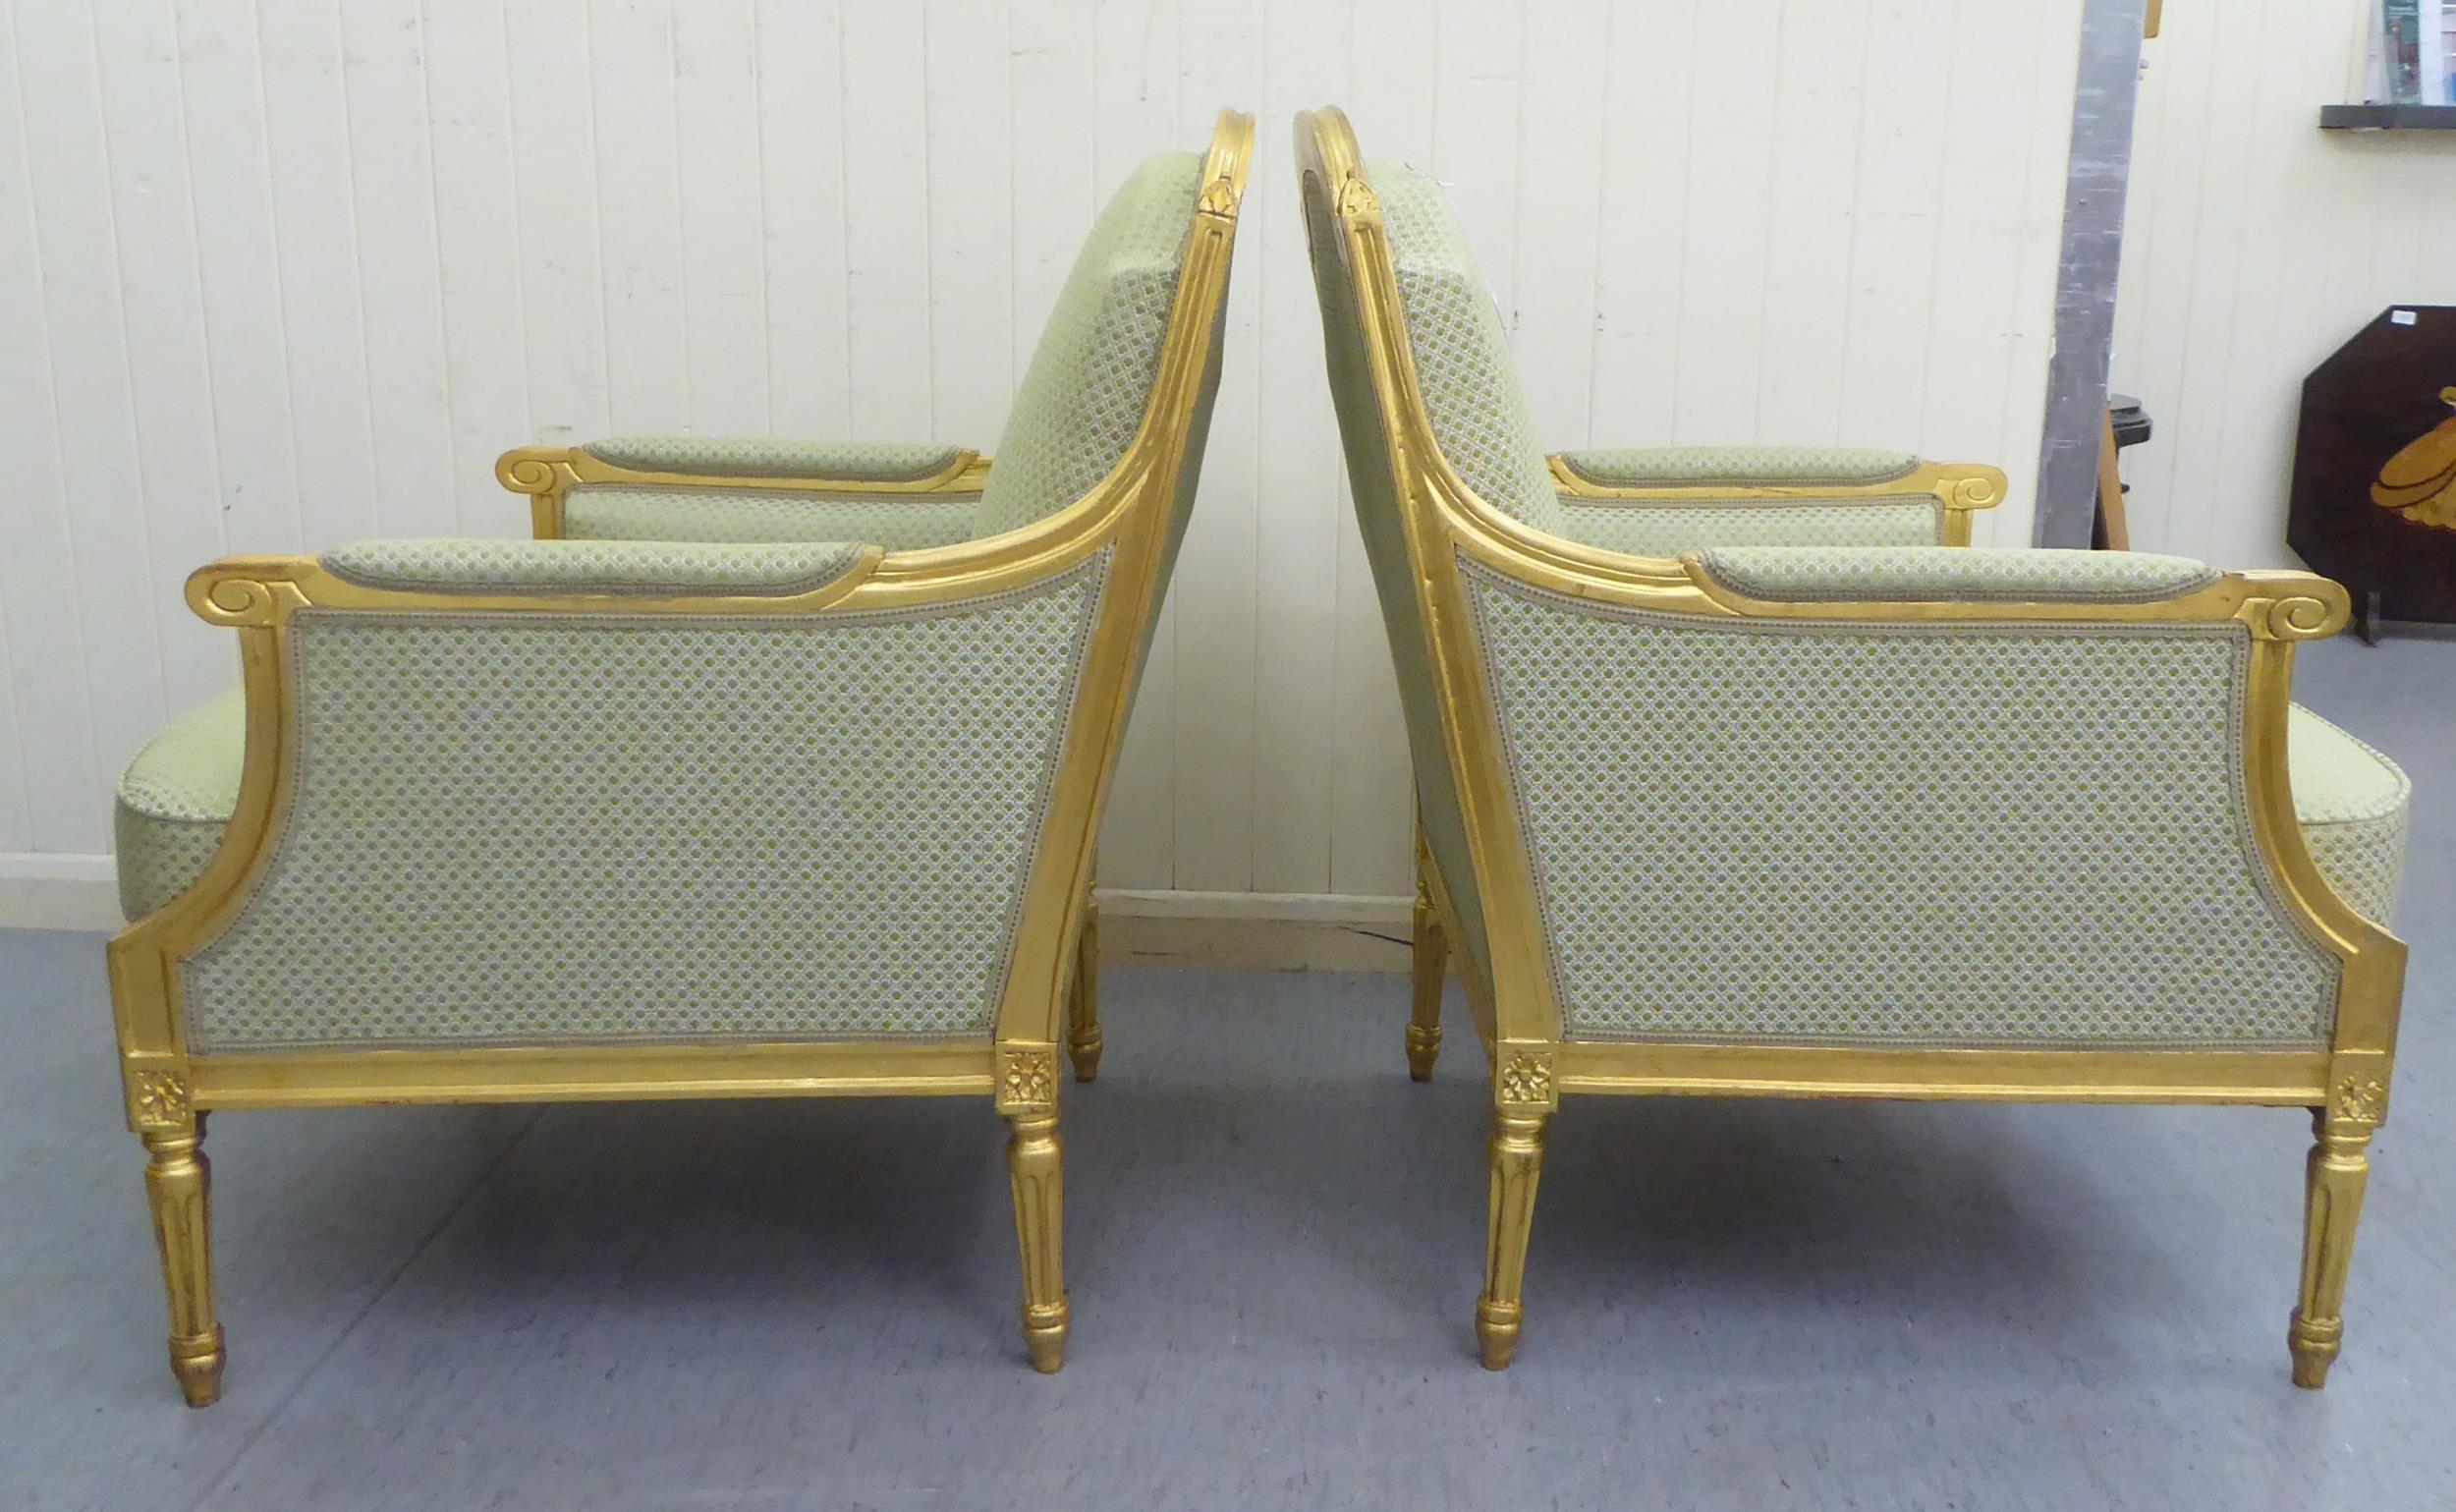 A Pair Of Louis XVI Style Antique Finished Gilded Show Wood Framed Enclosed Salon Chairs, - Image 2 of 5